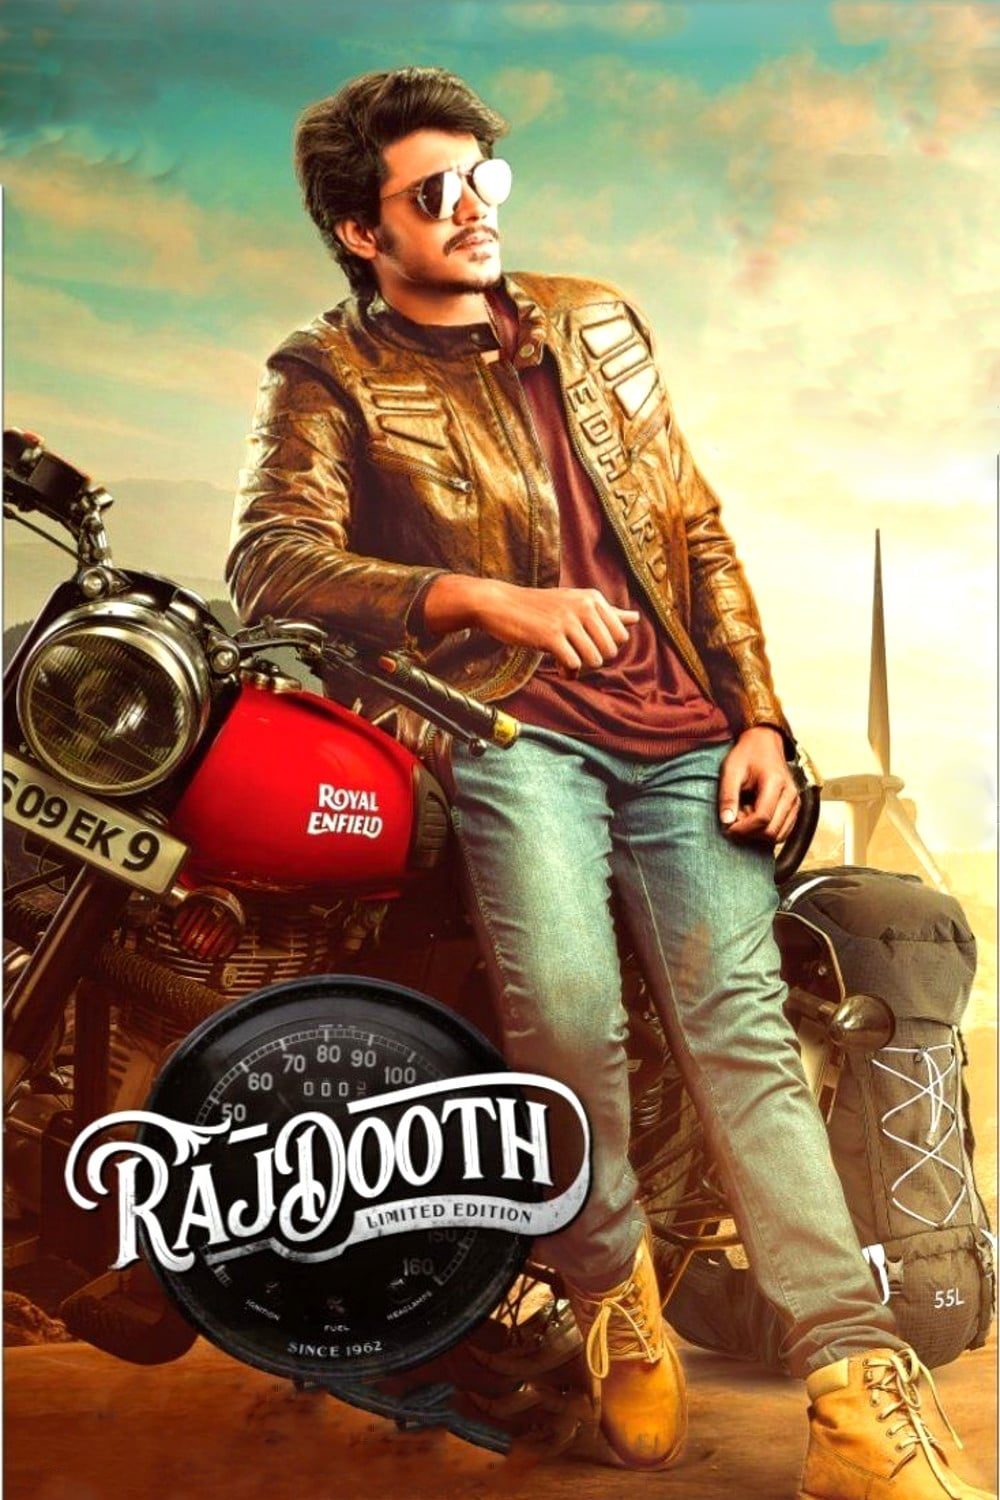 Poster for the movie "Rajdooth"